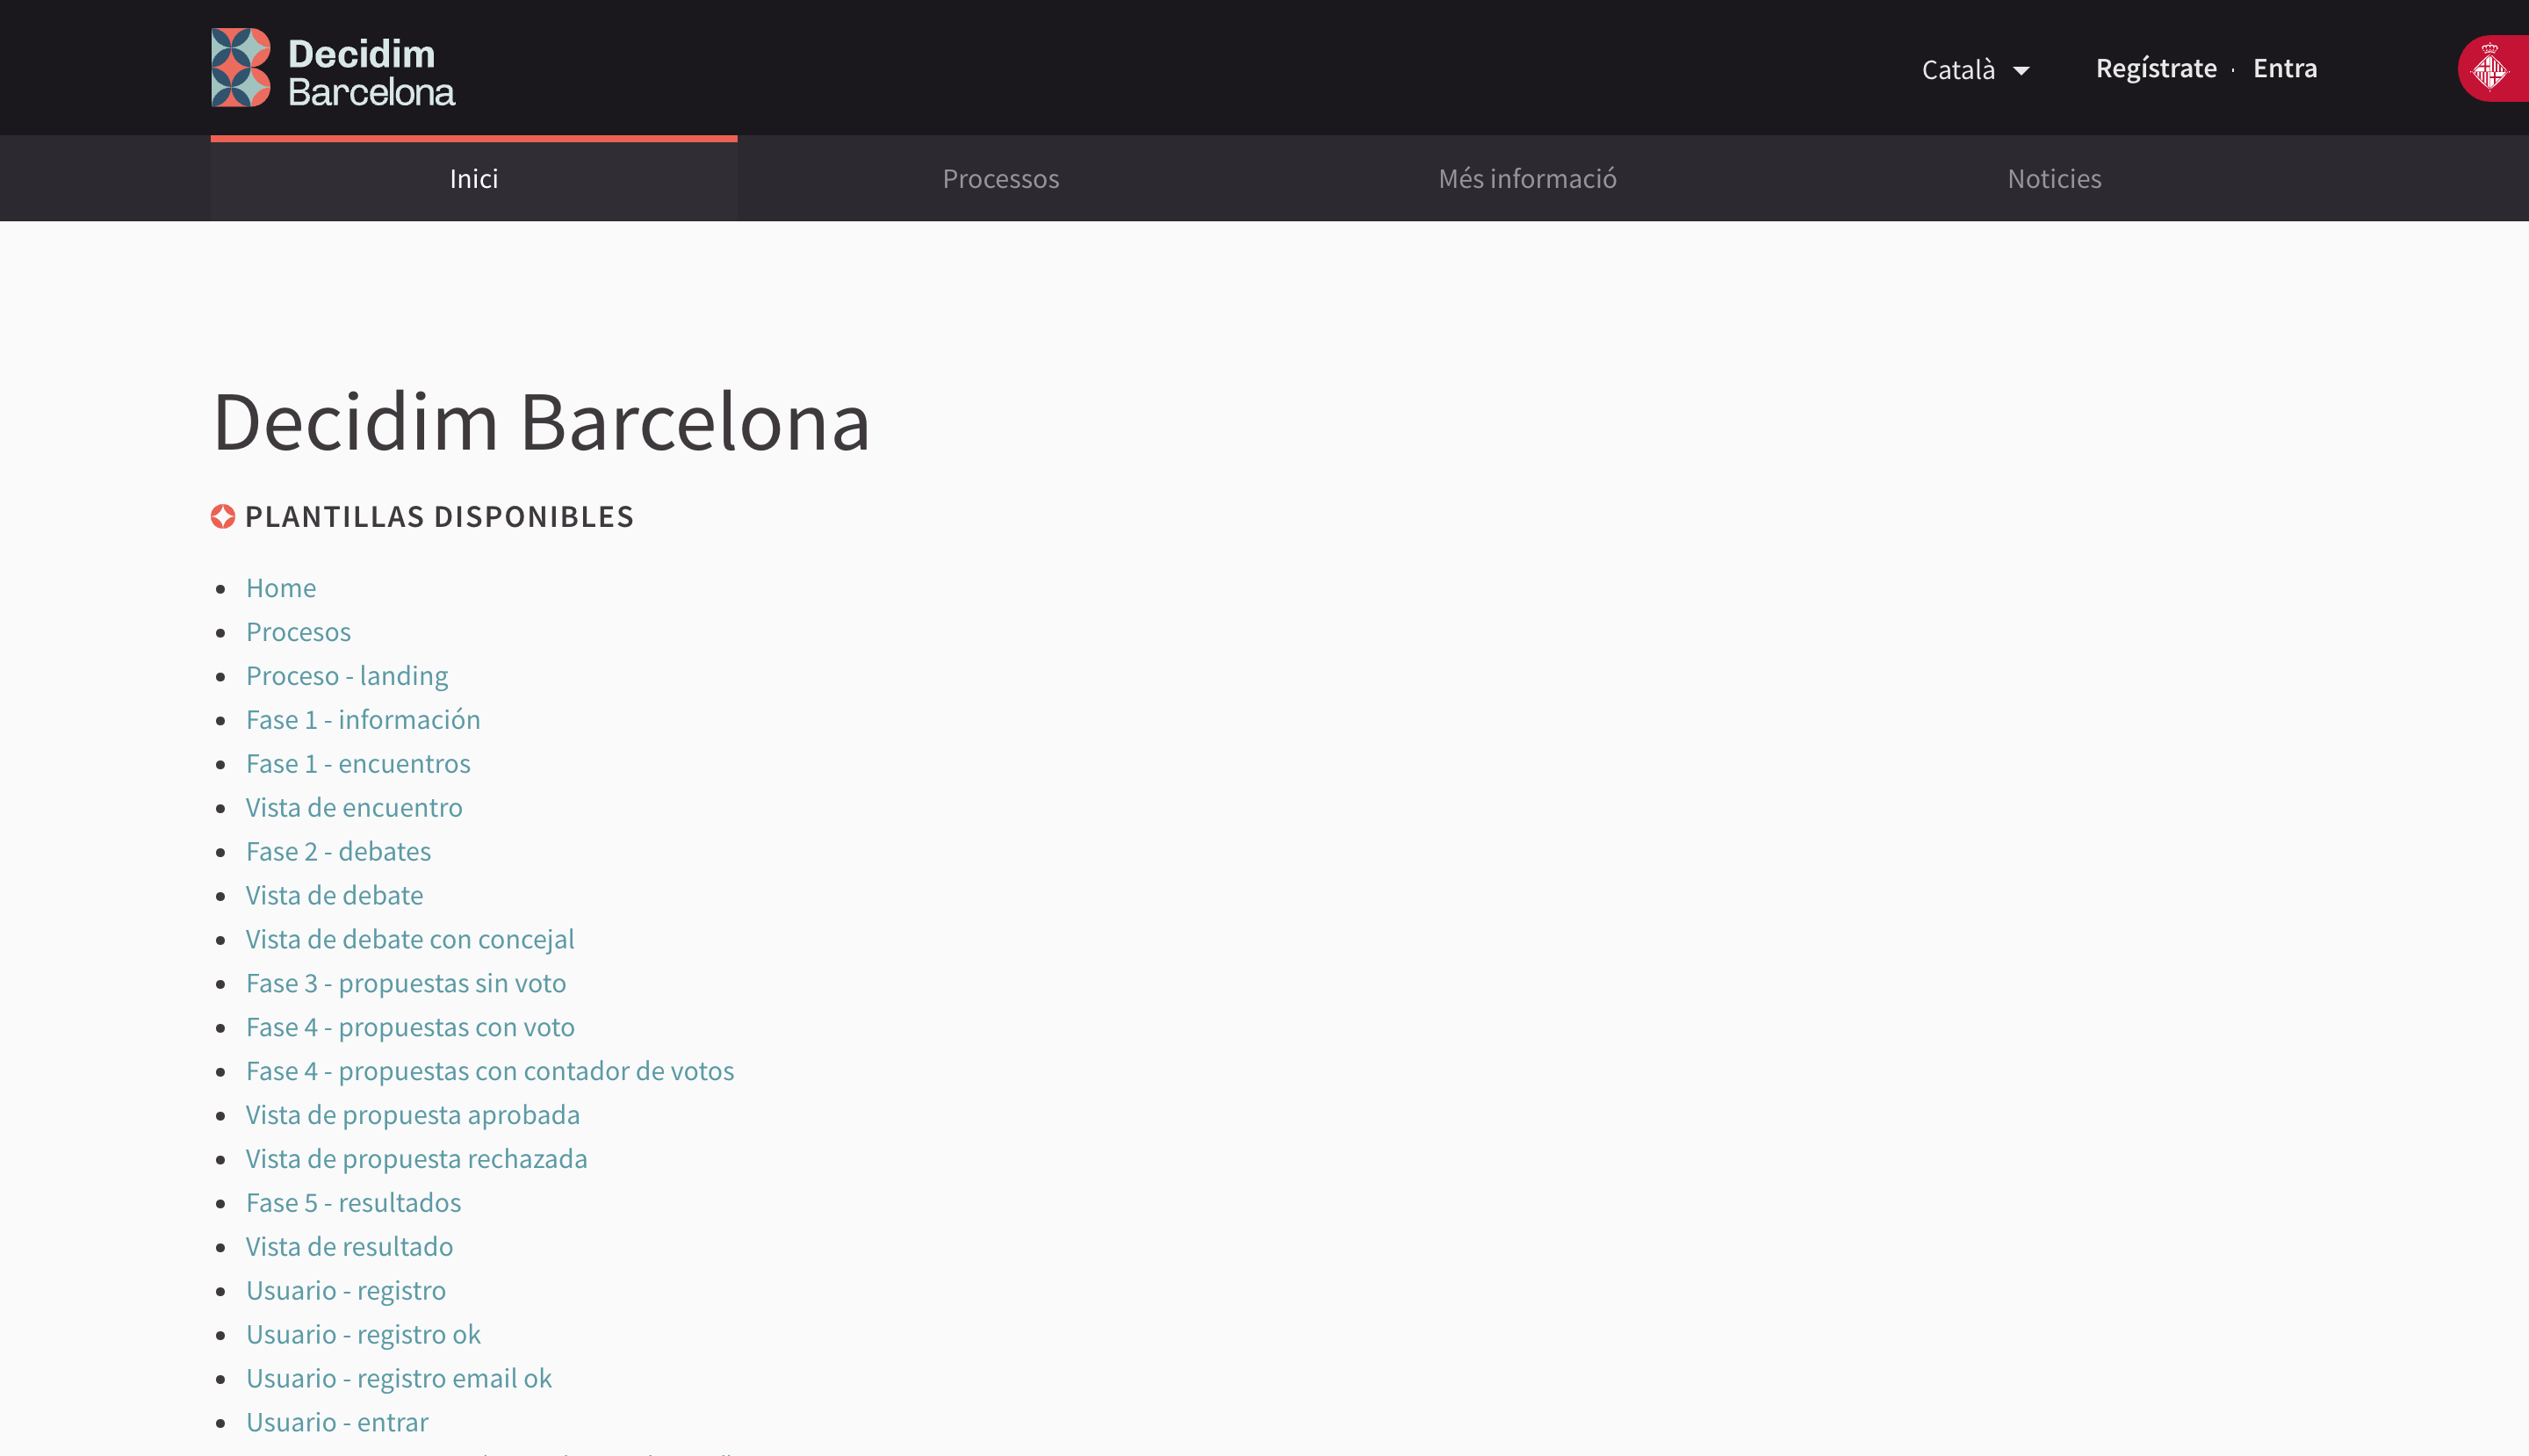 Decidim Barcelona's list of pages